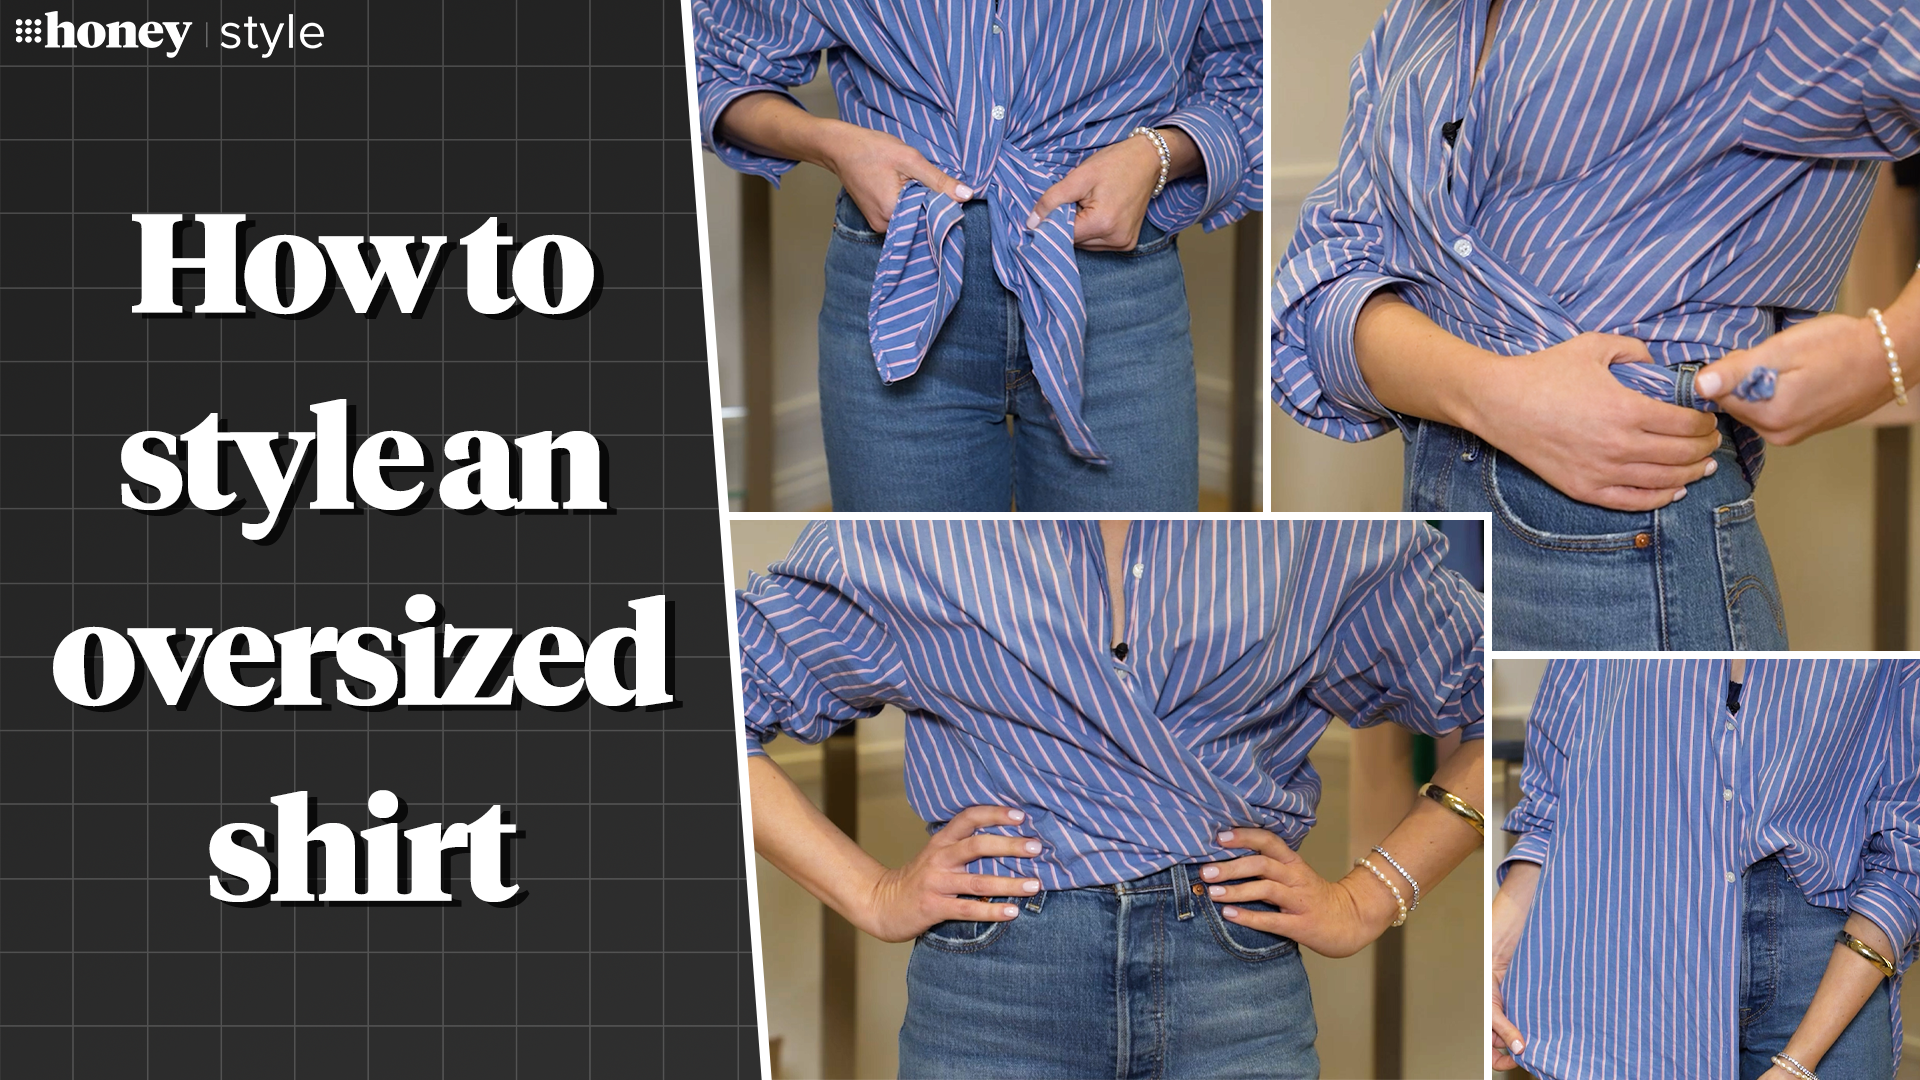 How to style an oversized shirt